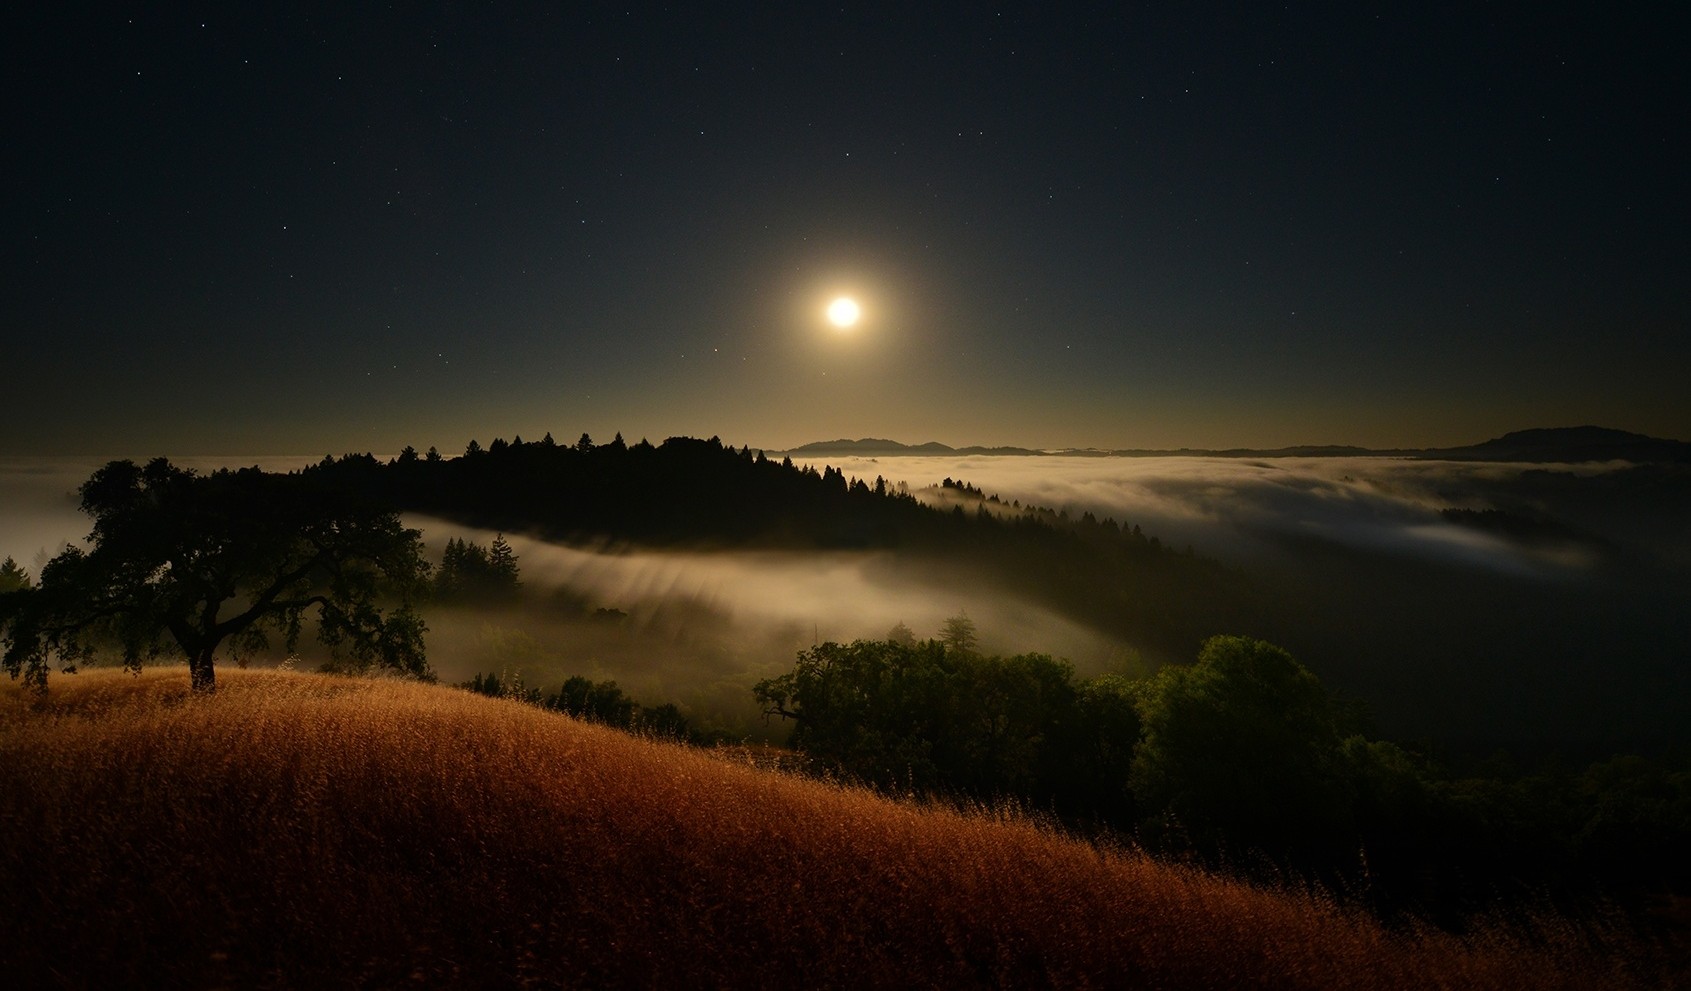 General 1691x991 Moon moonlight starry night mist hills clouds trees grass valley nature landscape